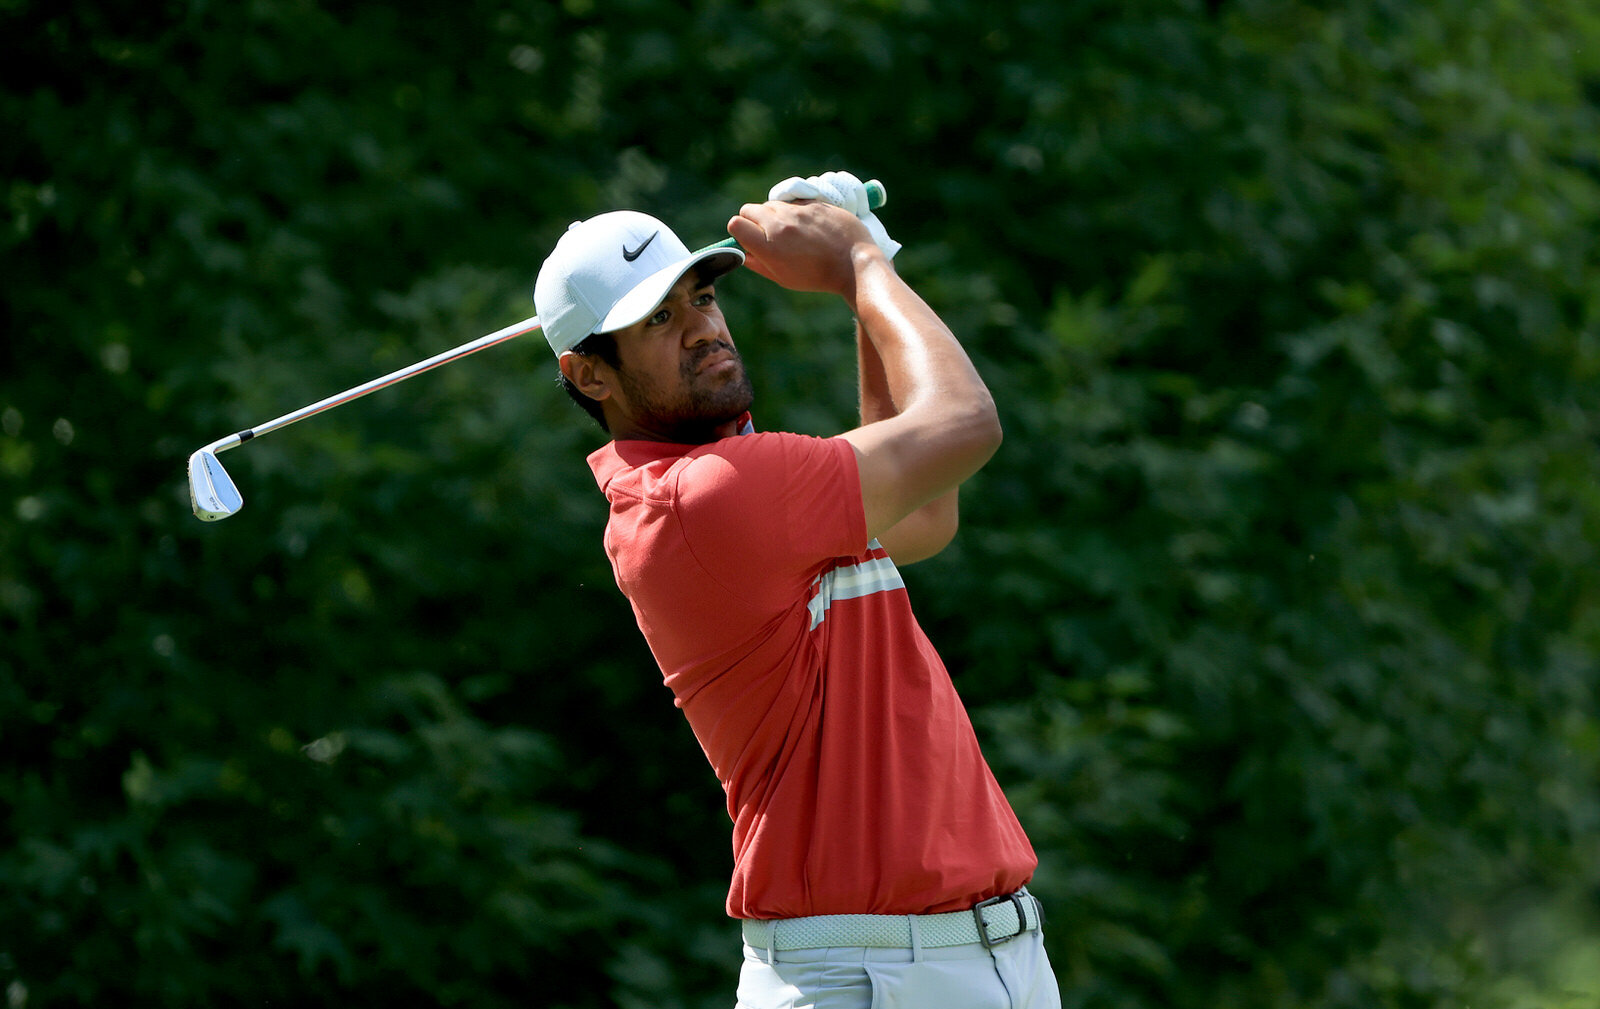  DUBLIN, OHIO - JULY 17: Tony Finau of the United States plays his shot from the fourth tee during the second round of The Memorial Tournament on July 17, 2020 at Muirfield Village Golf Club in Dublin, Ohio. (Photo by Sam Greenwood/Getty Images) 